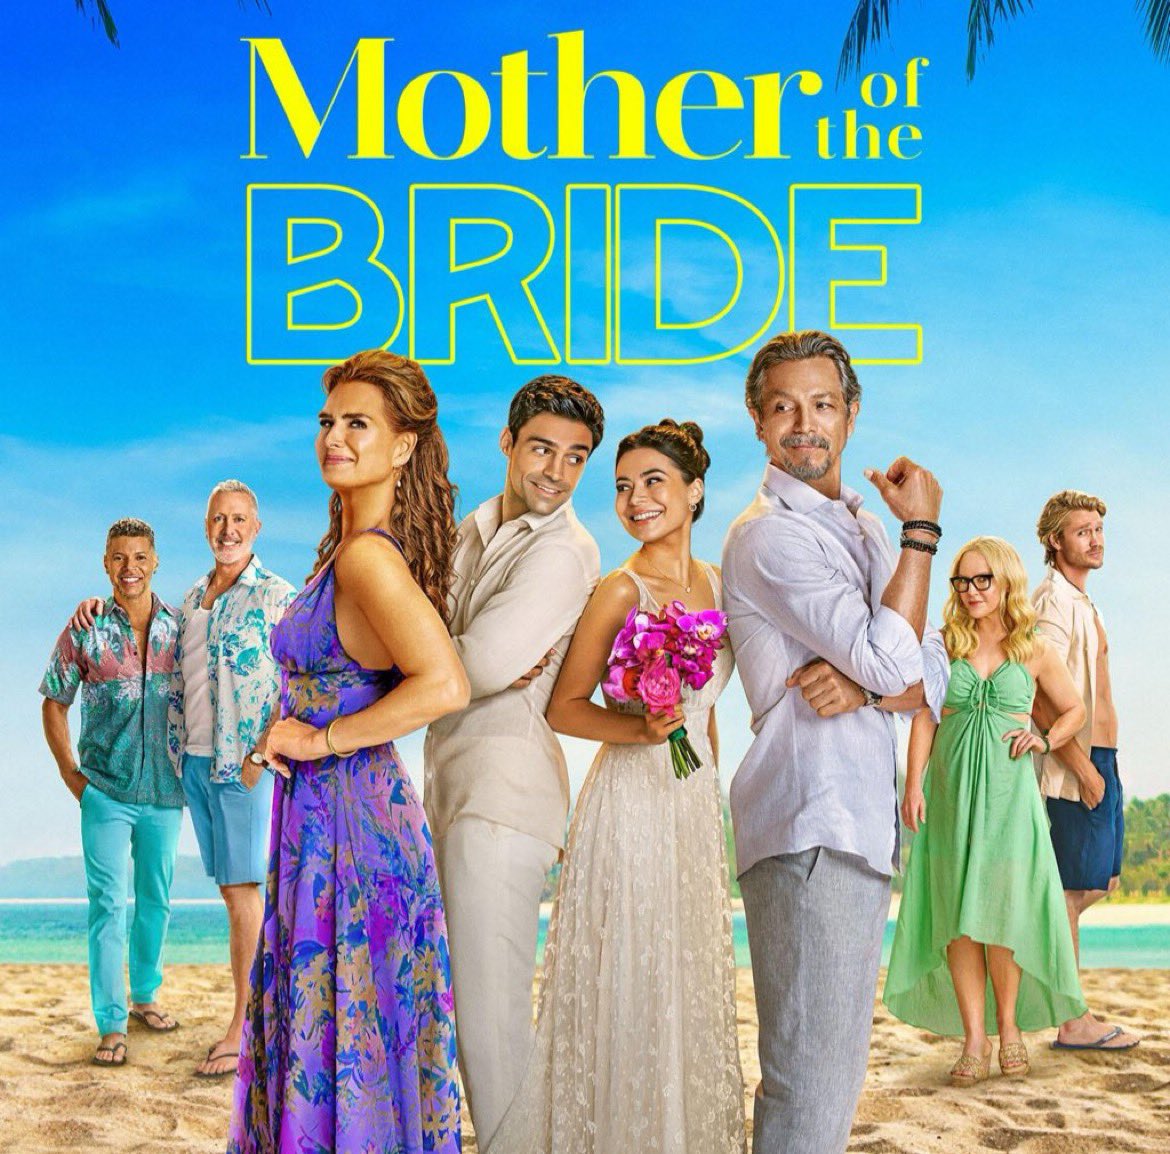 mother of the bride on netflix is actually so bad and not even the good kind of bad. it’s giving AI script overloaded with social media references and pickleball. it’s complete brain mush and it’s exactly what I needed today